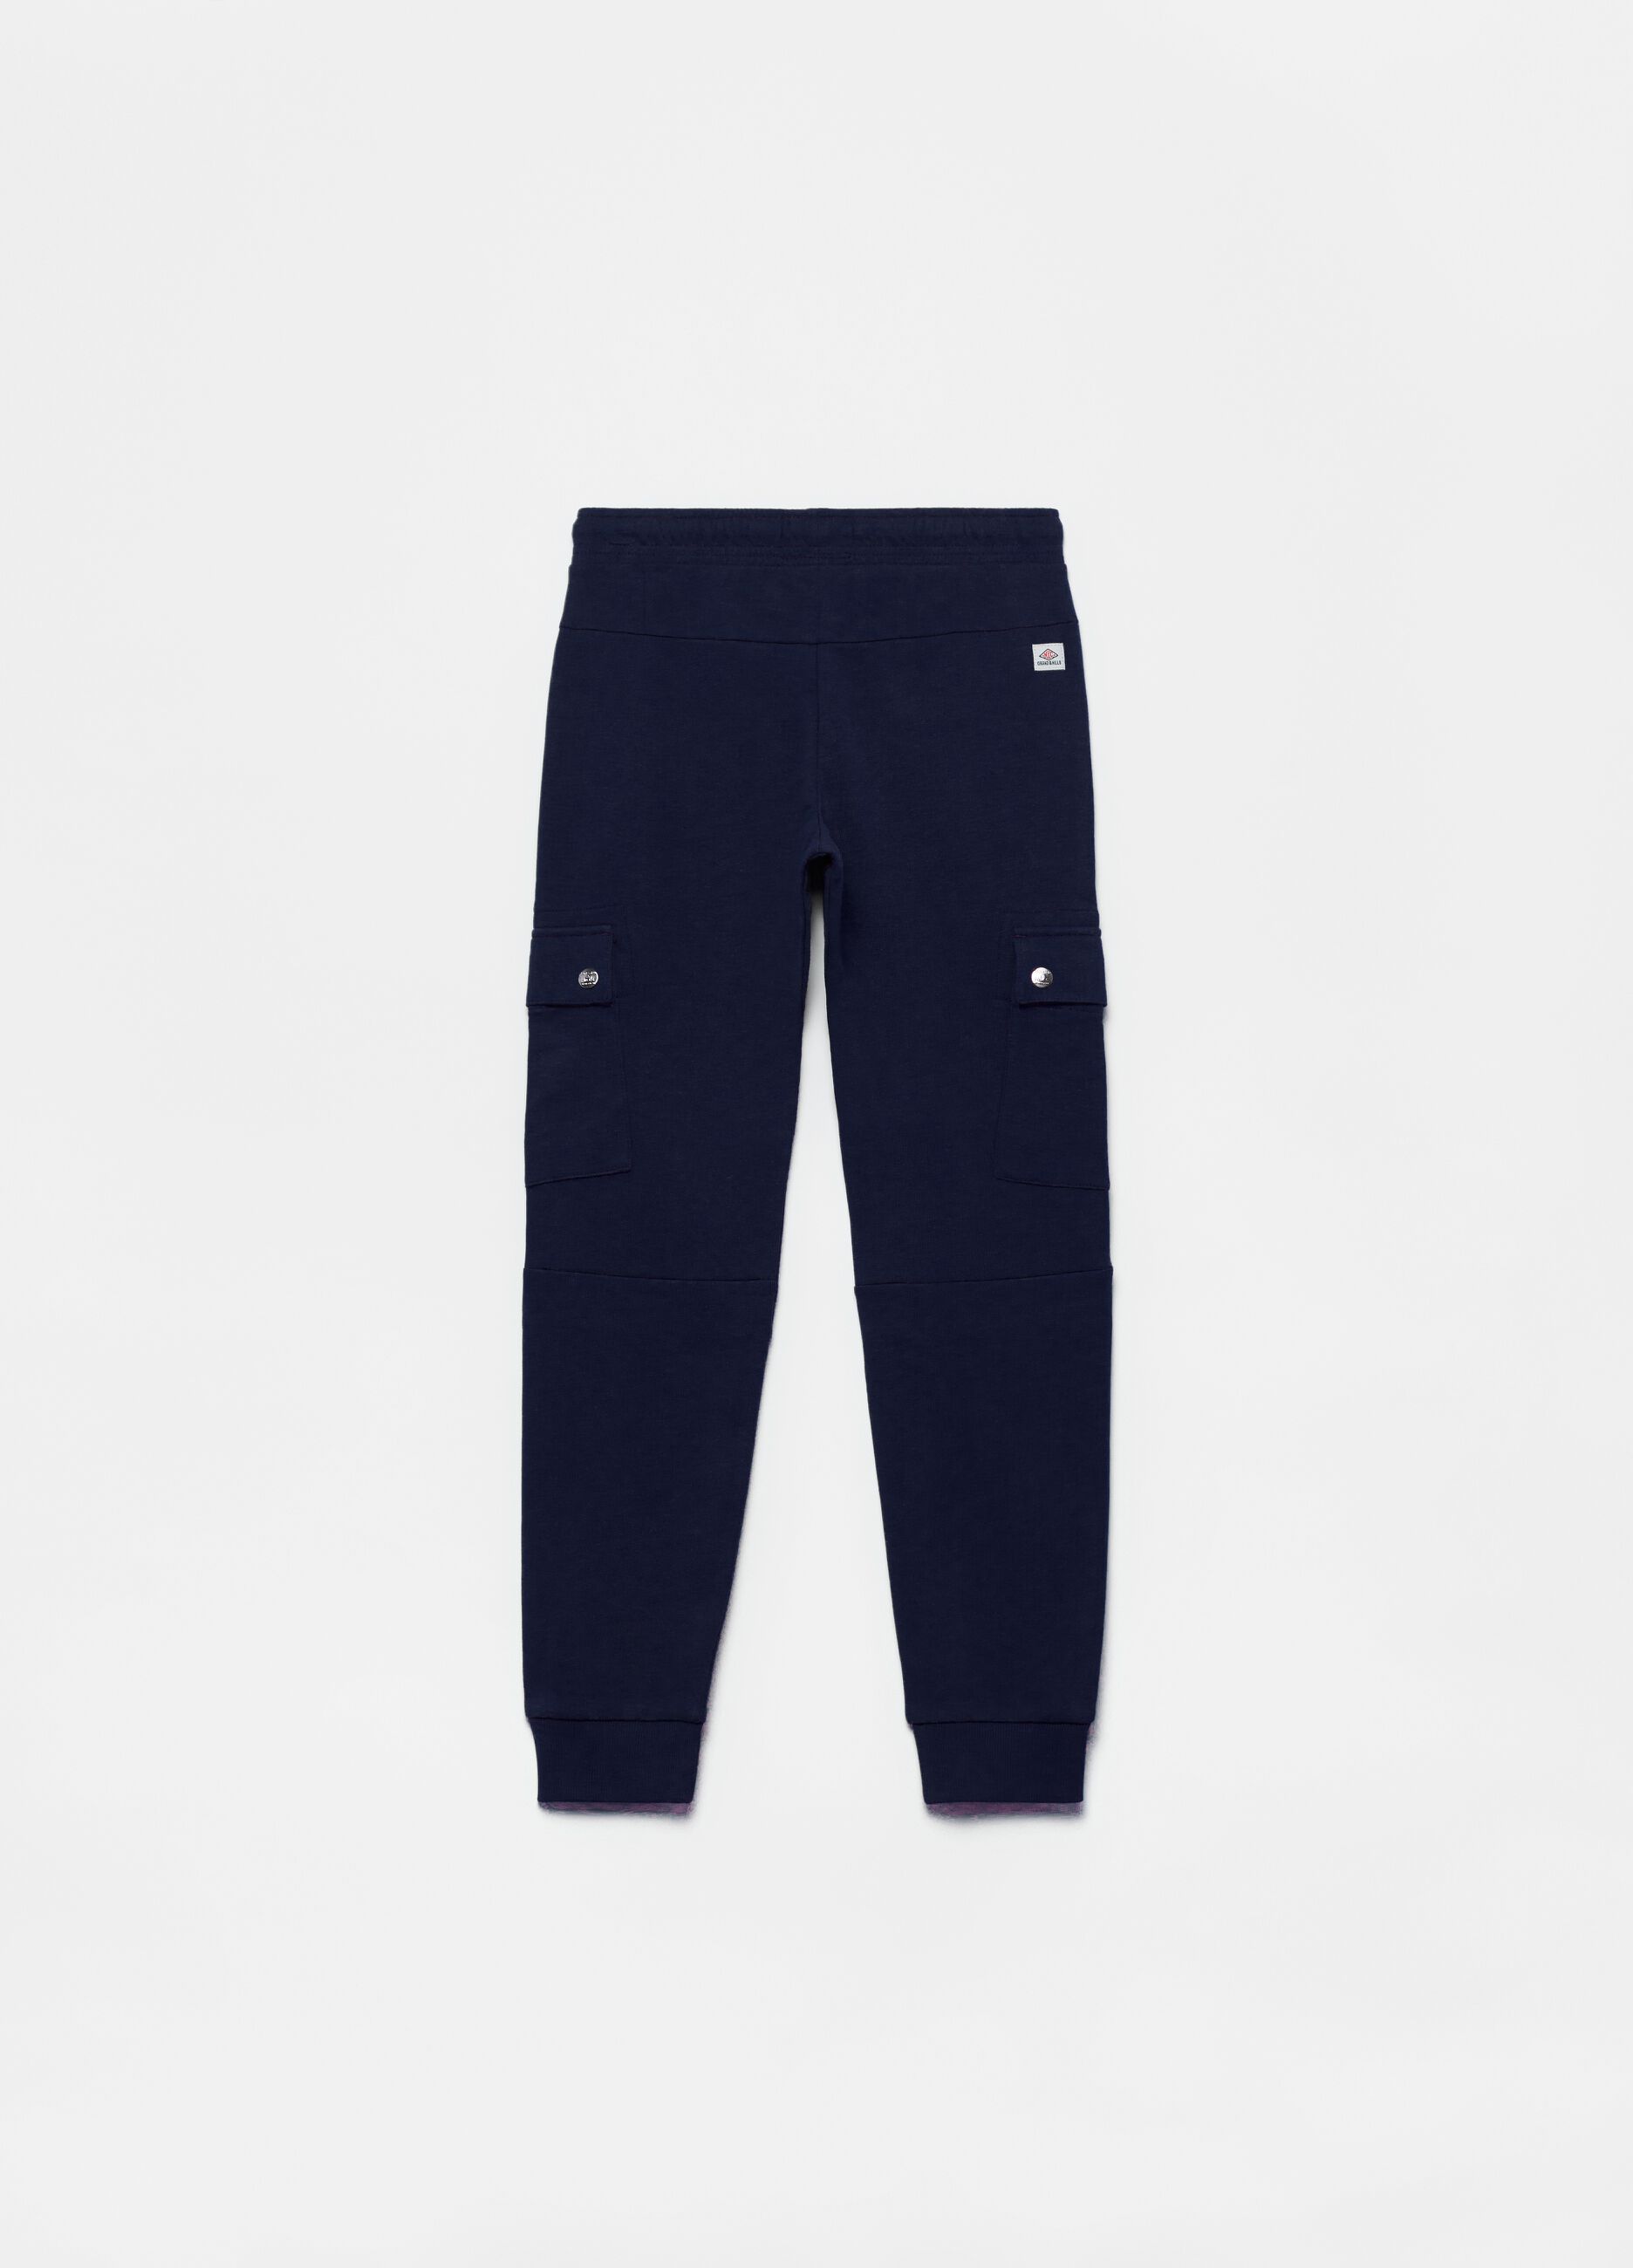 Solid colour cargo joggers with pockets